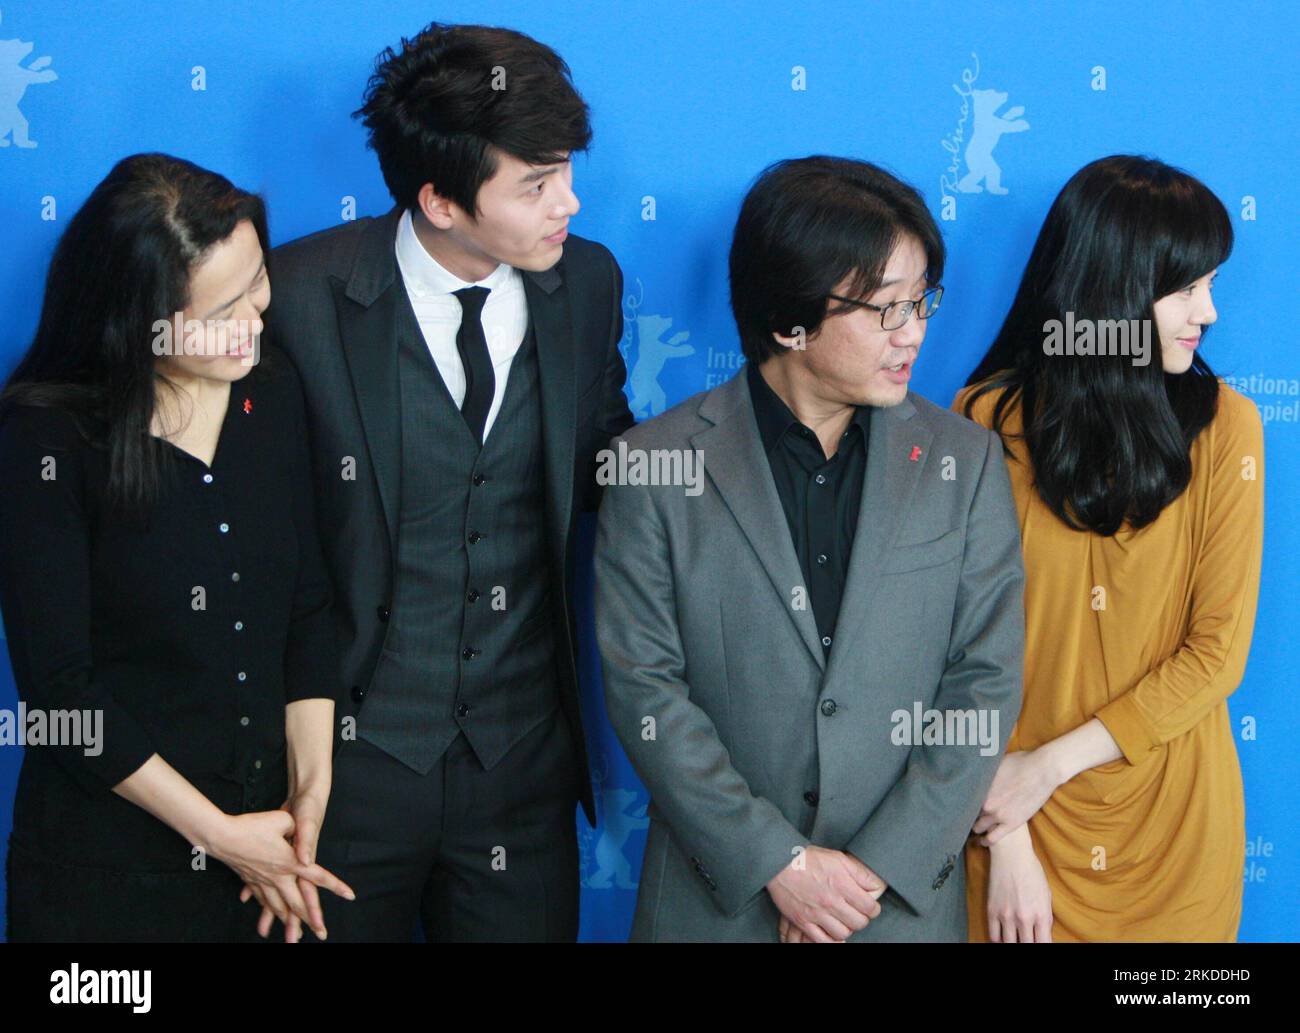 Bildnummer: 54921435  Datum: 17.02.2011  Copyright: imago/Xinhua (110217) -- BERLIN, Feb. 17, 2011 (Xinhua) -- South Korean actor Hyun Bin (2nd L), actress Lim Soo-jung (1st R), and director Yoon-ki Lee (2nd R) arrive for a press conference for the film Come Rain, Come Shine during the Berlin Film Festival, on Feb. 17, 2011. The 61st Berlin Film Festival will be held from Feb. 10 to Feb. 20 with the screening of about 400 films from 58 countries. (Xinhua/Luo Huanhuan) (zcc) GERMANY-BERLIN-FILM FESTIVAL PUBLICATIONxNOTxINxCHN Kultur Entertainment People Film 61. Internationale Filmfestspiele Be Stock Photo